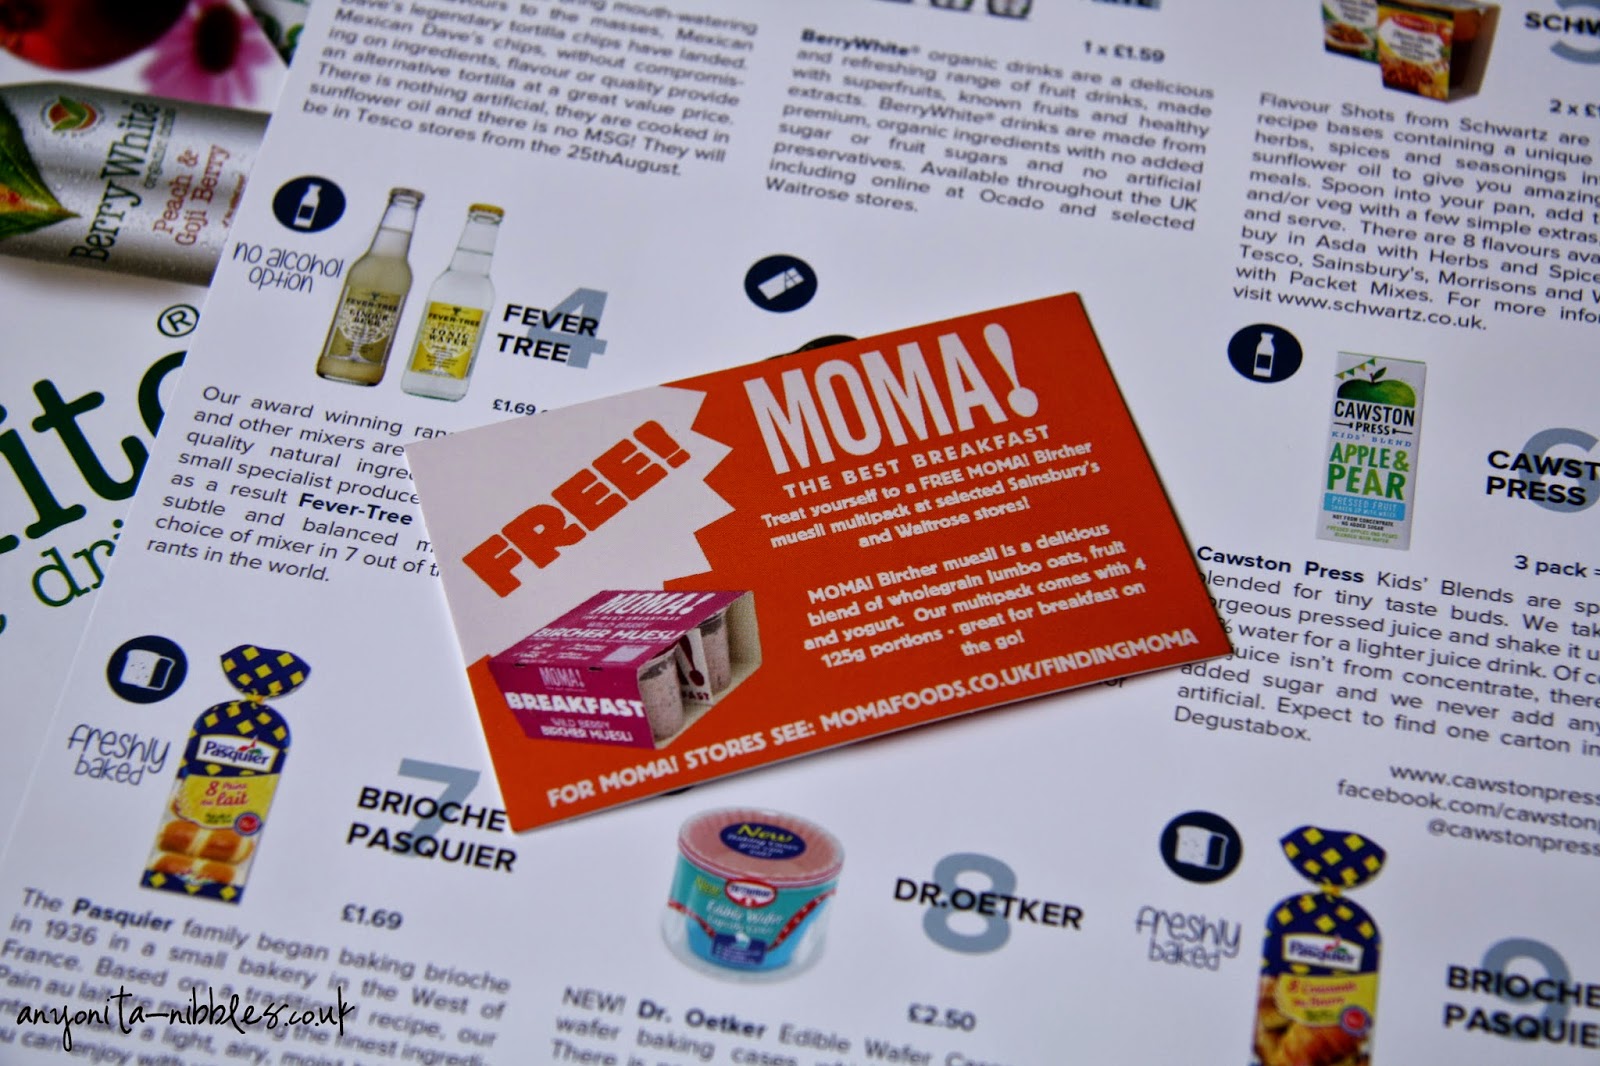 Degustabox also sends refrigerated goodies in the form of vouchers | anyonita-nibbles.co.uk